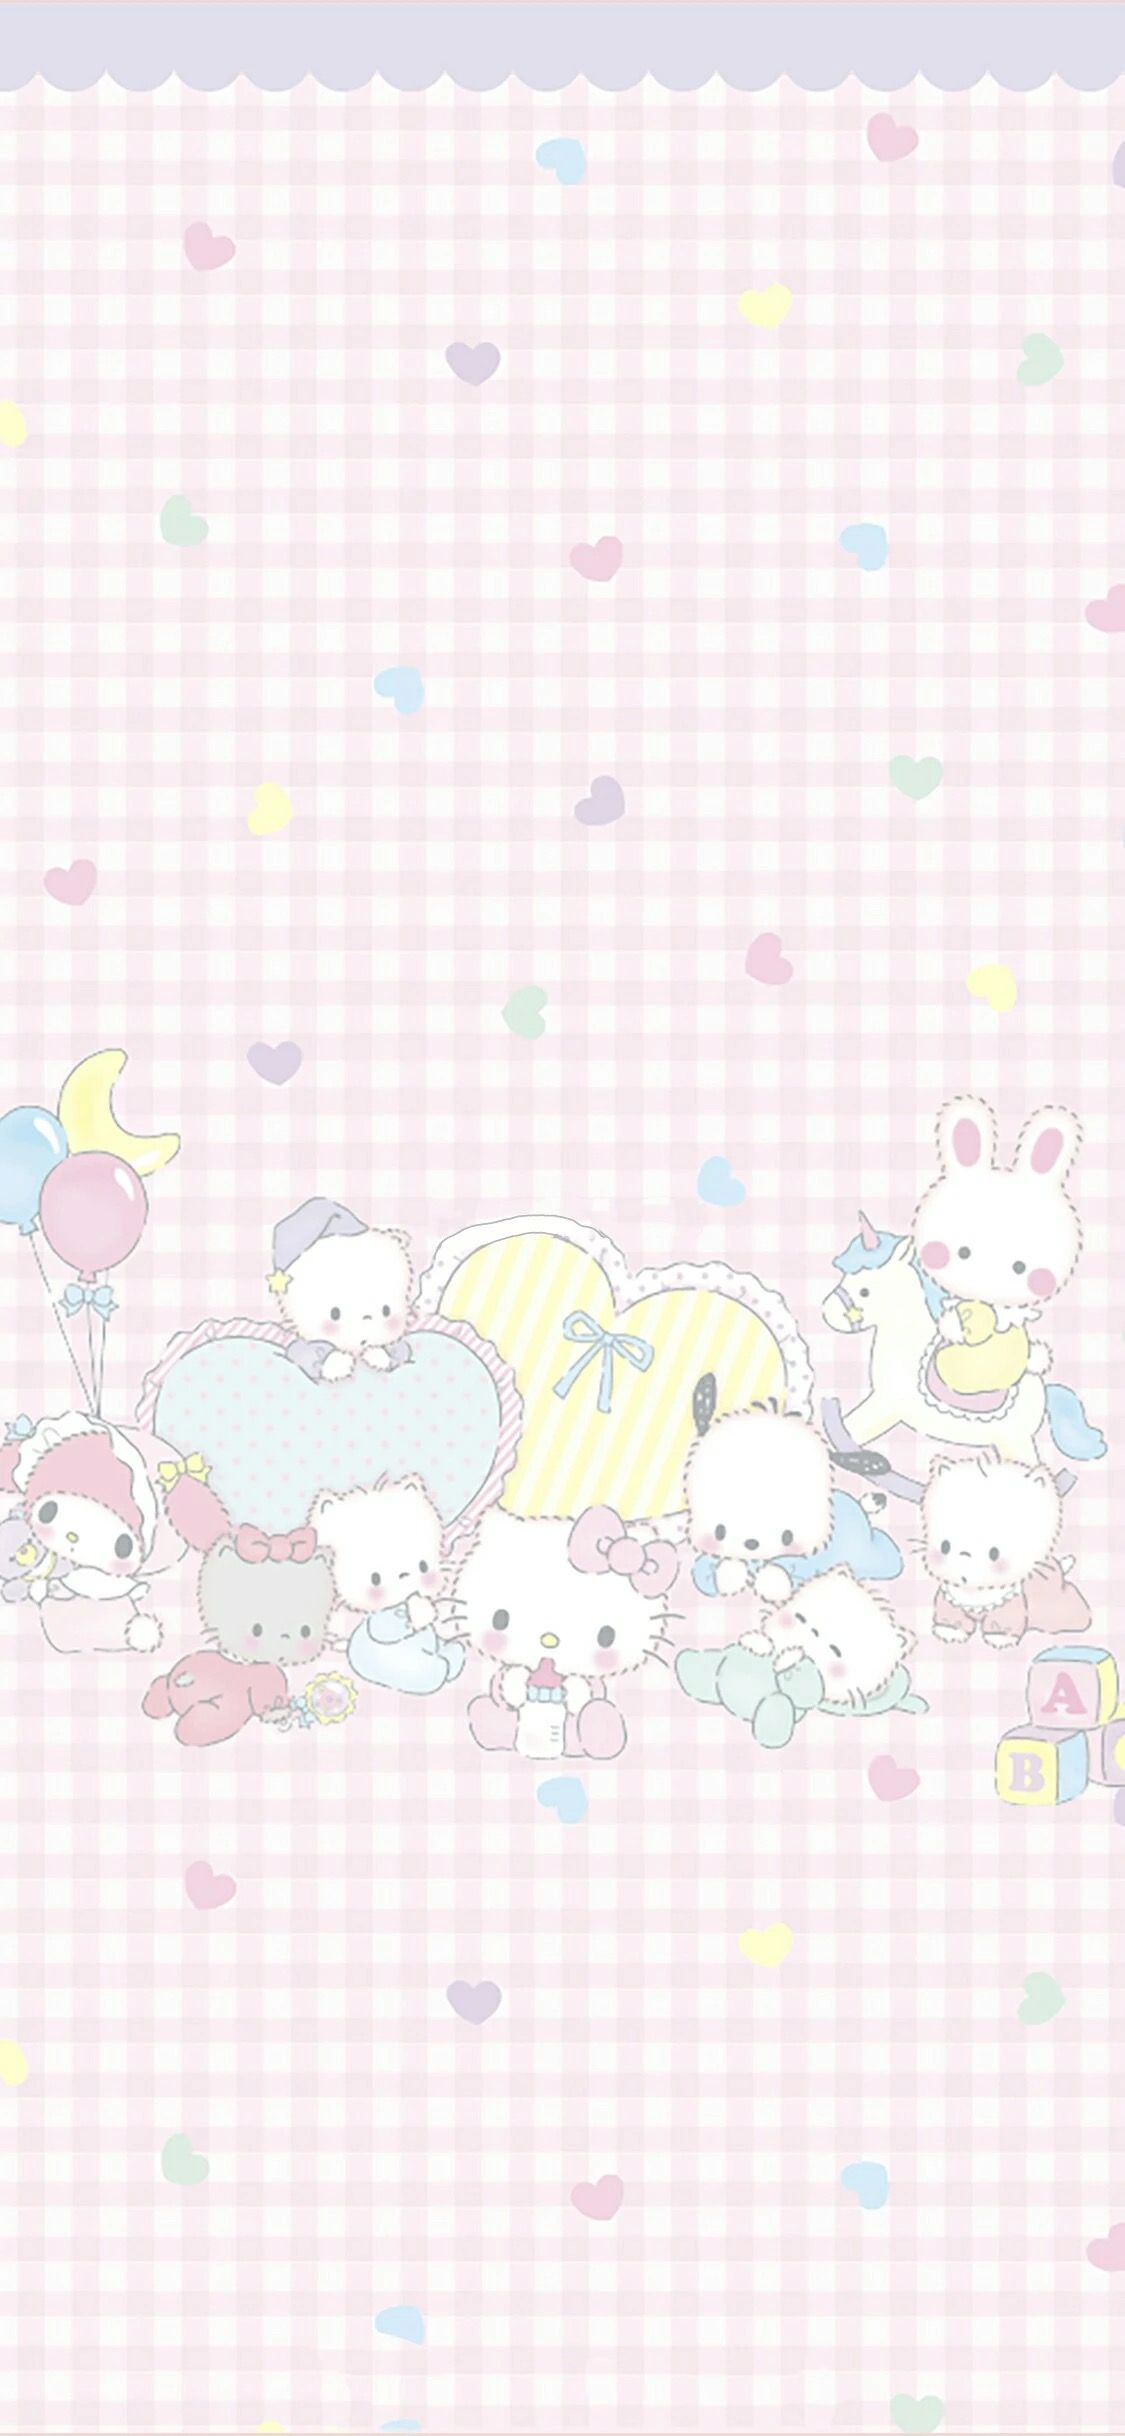 Sanrio Characters Wallpapers and